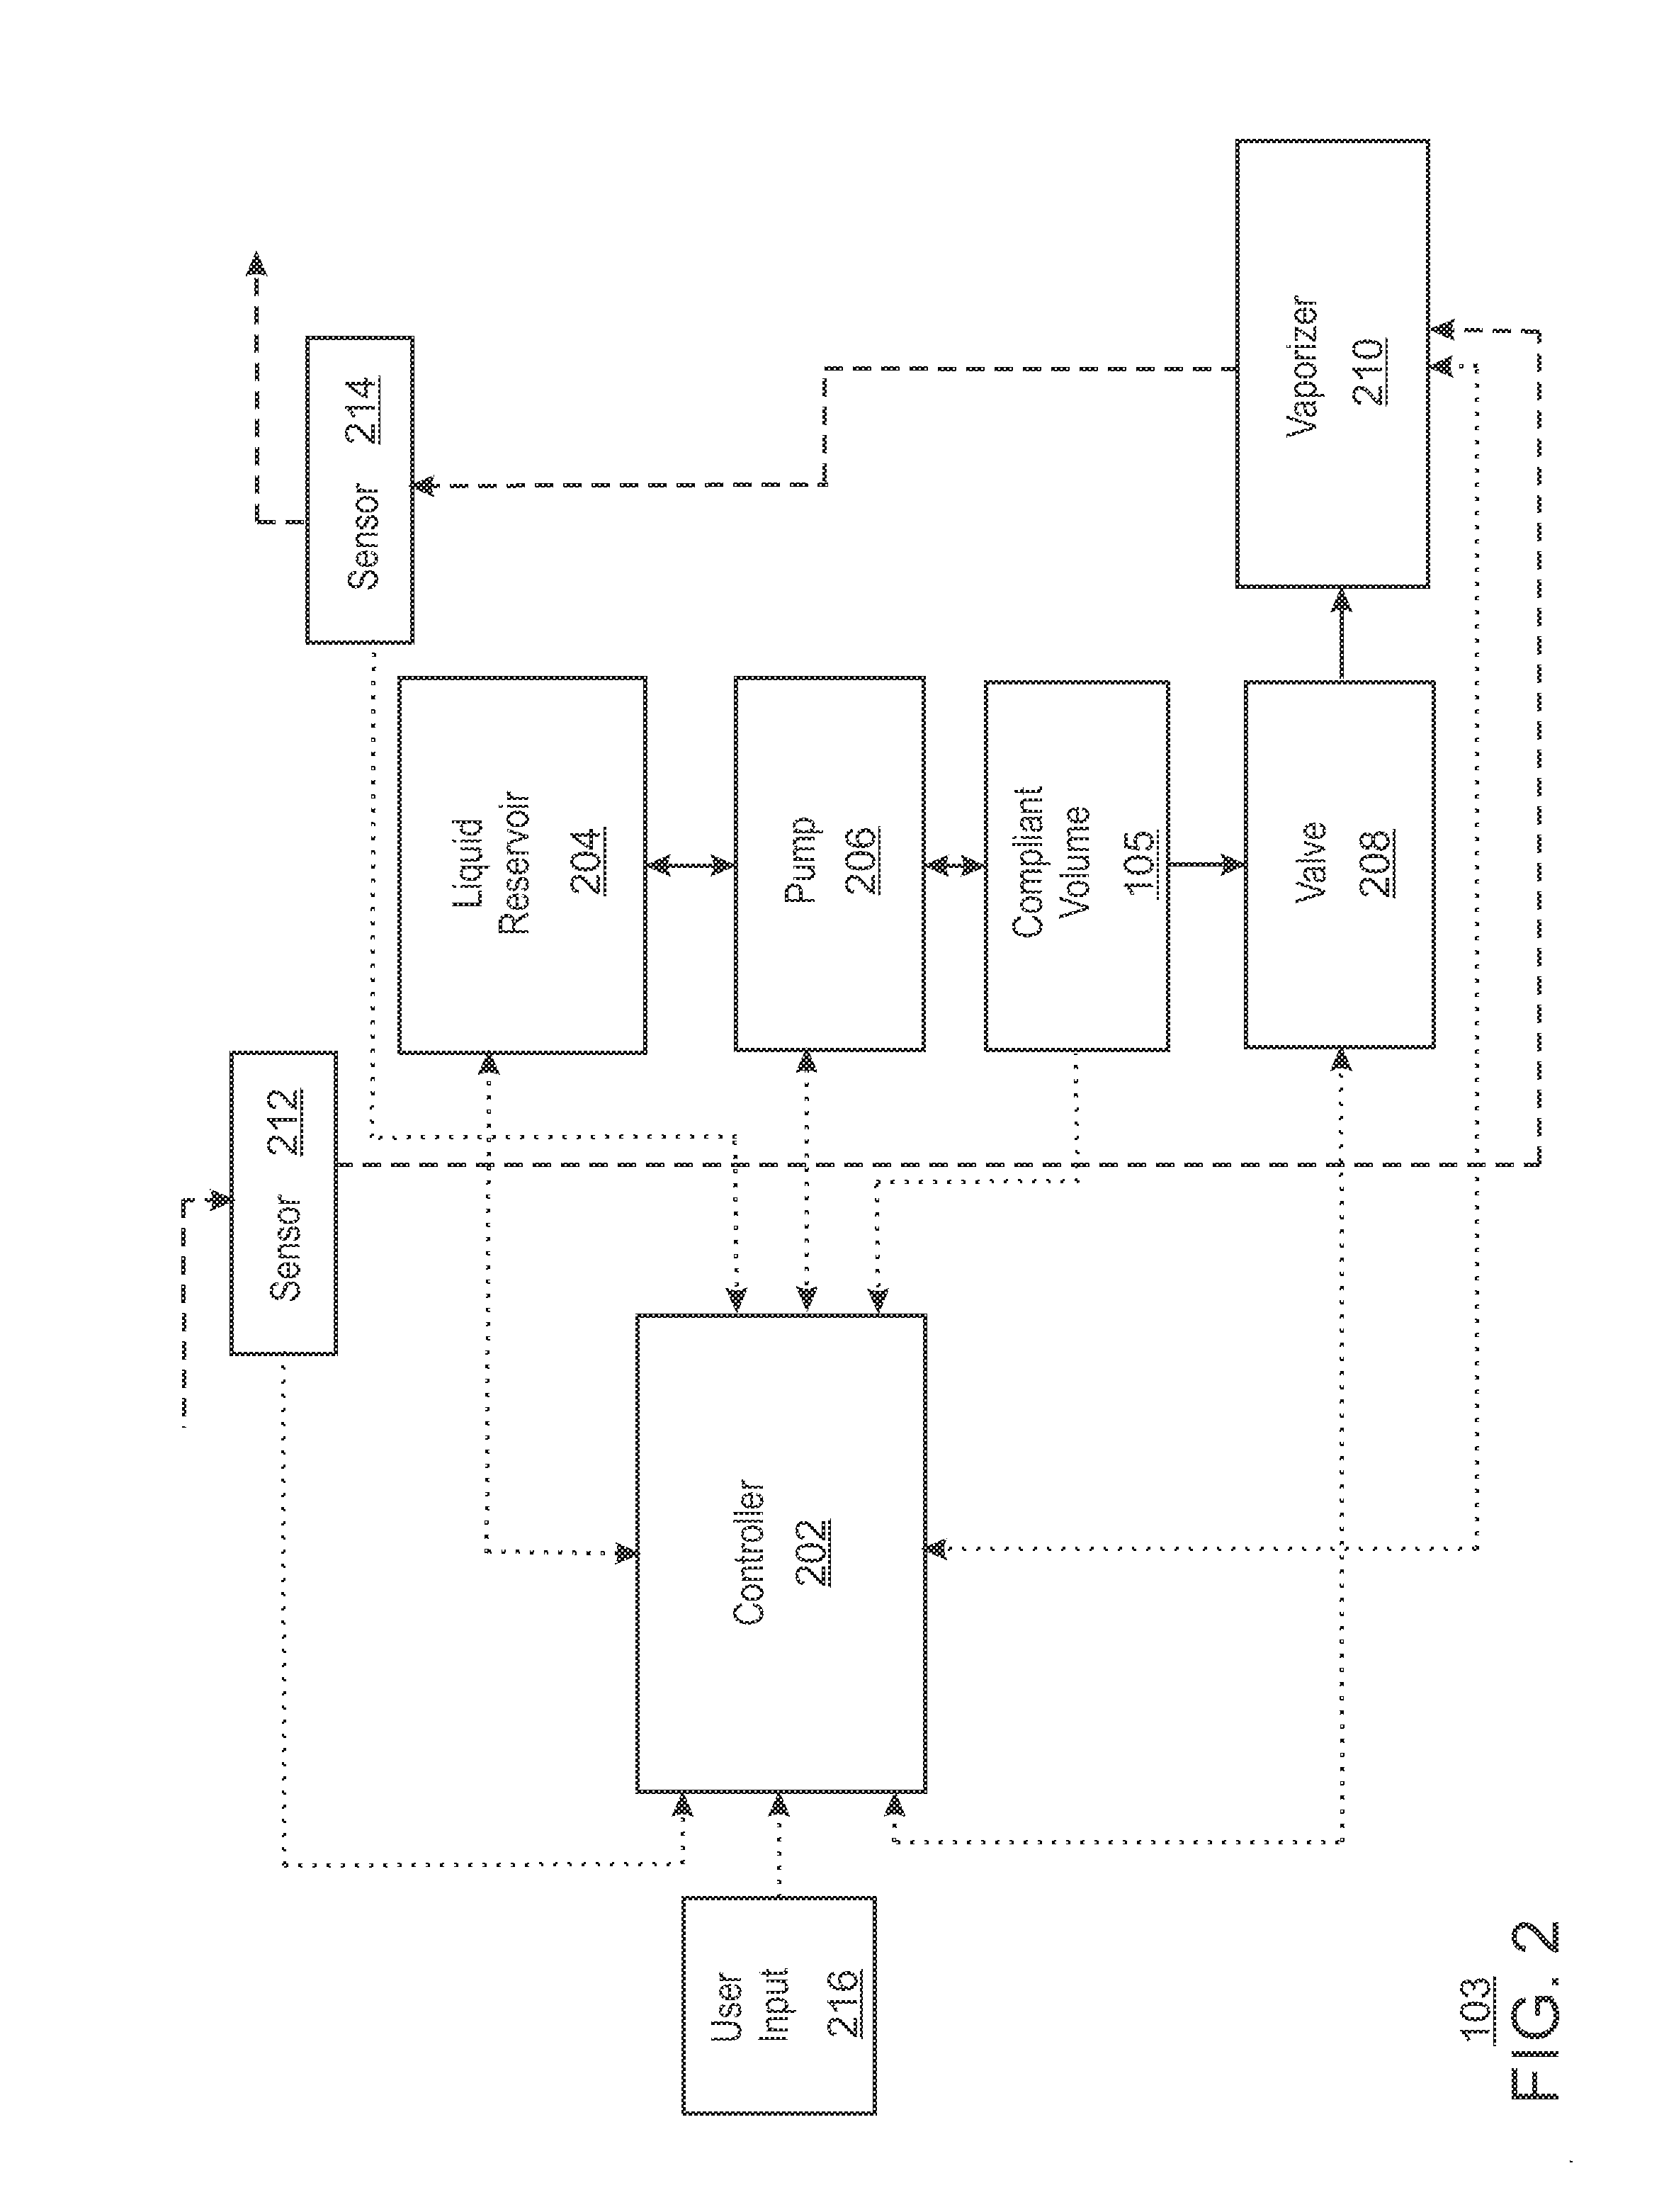 Anesthesia Compliant Volume System and Method